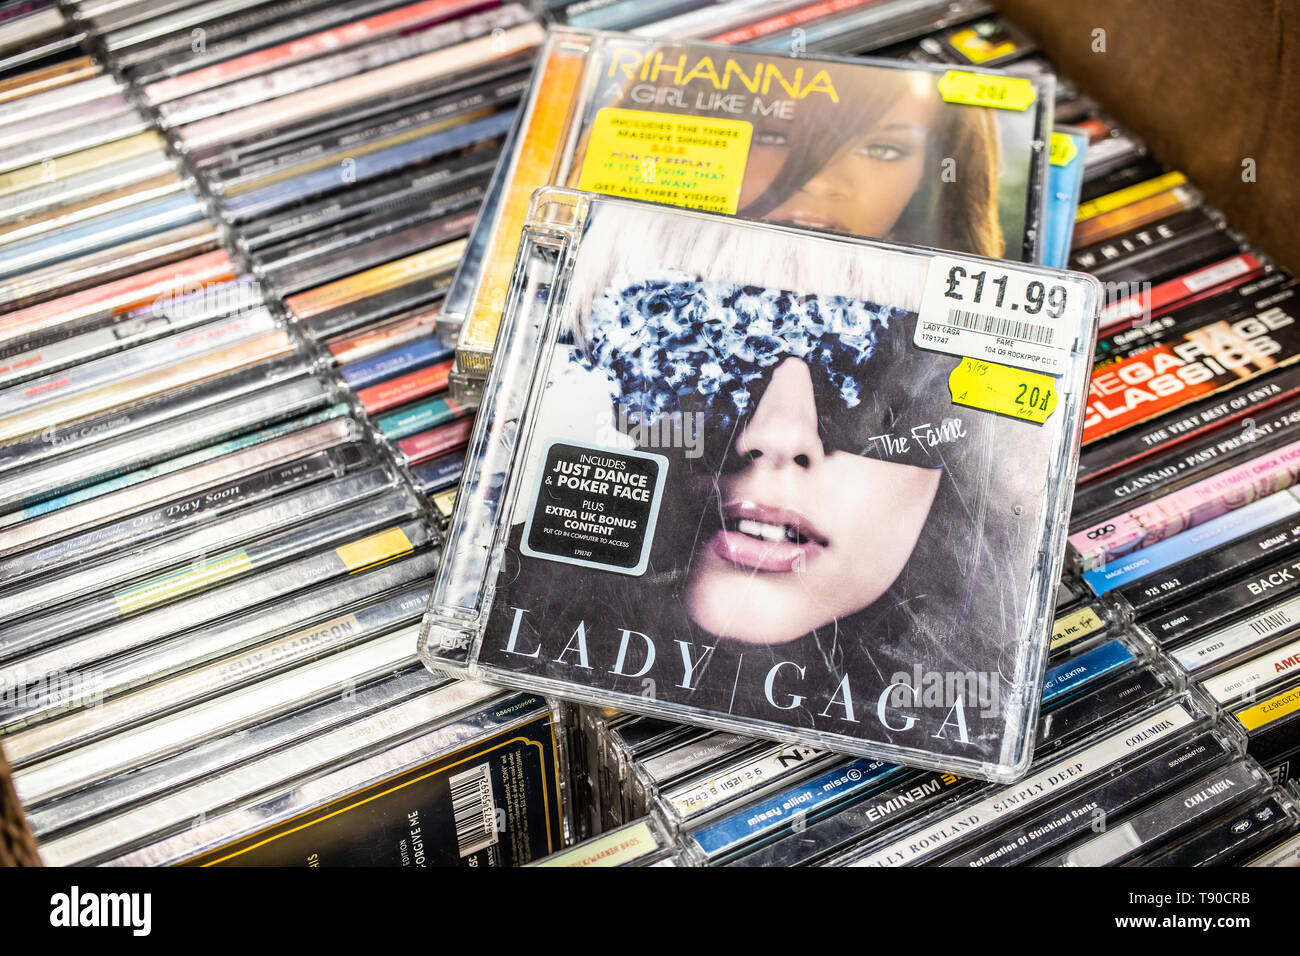 Lady gaga art pop album cover hi-res stock photography and images - Alamy